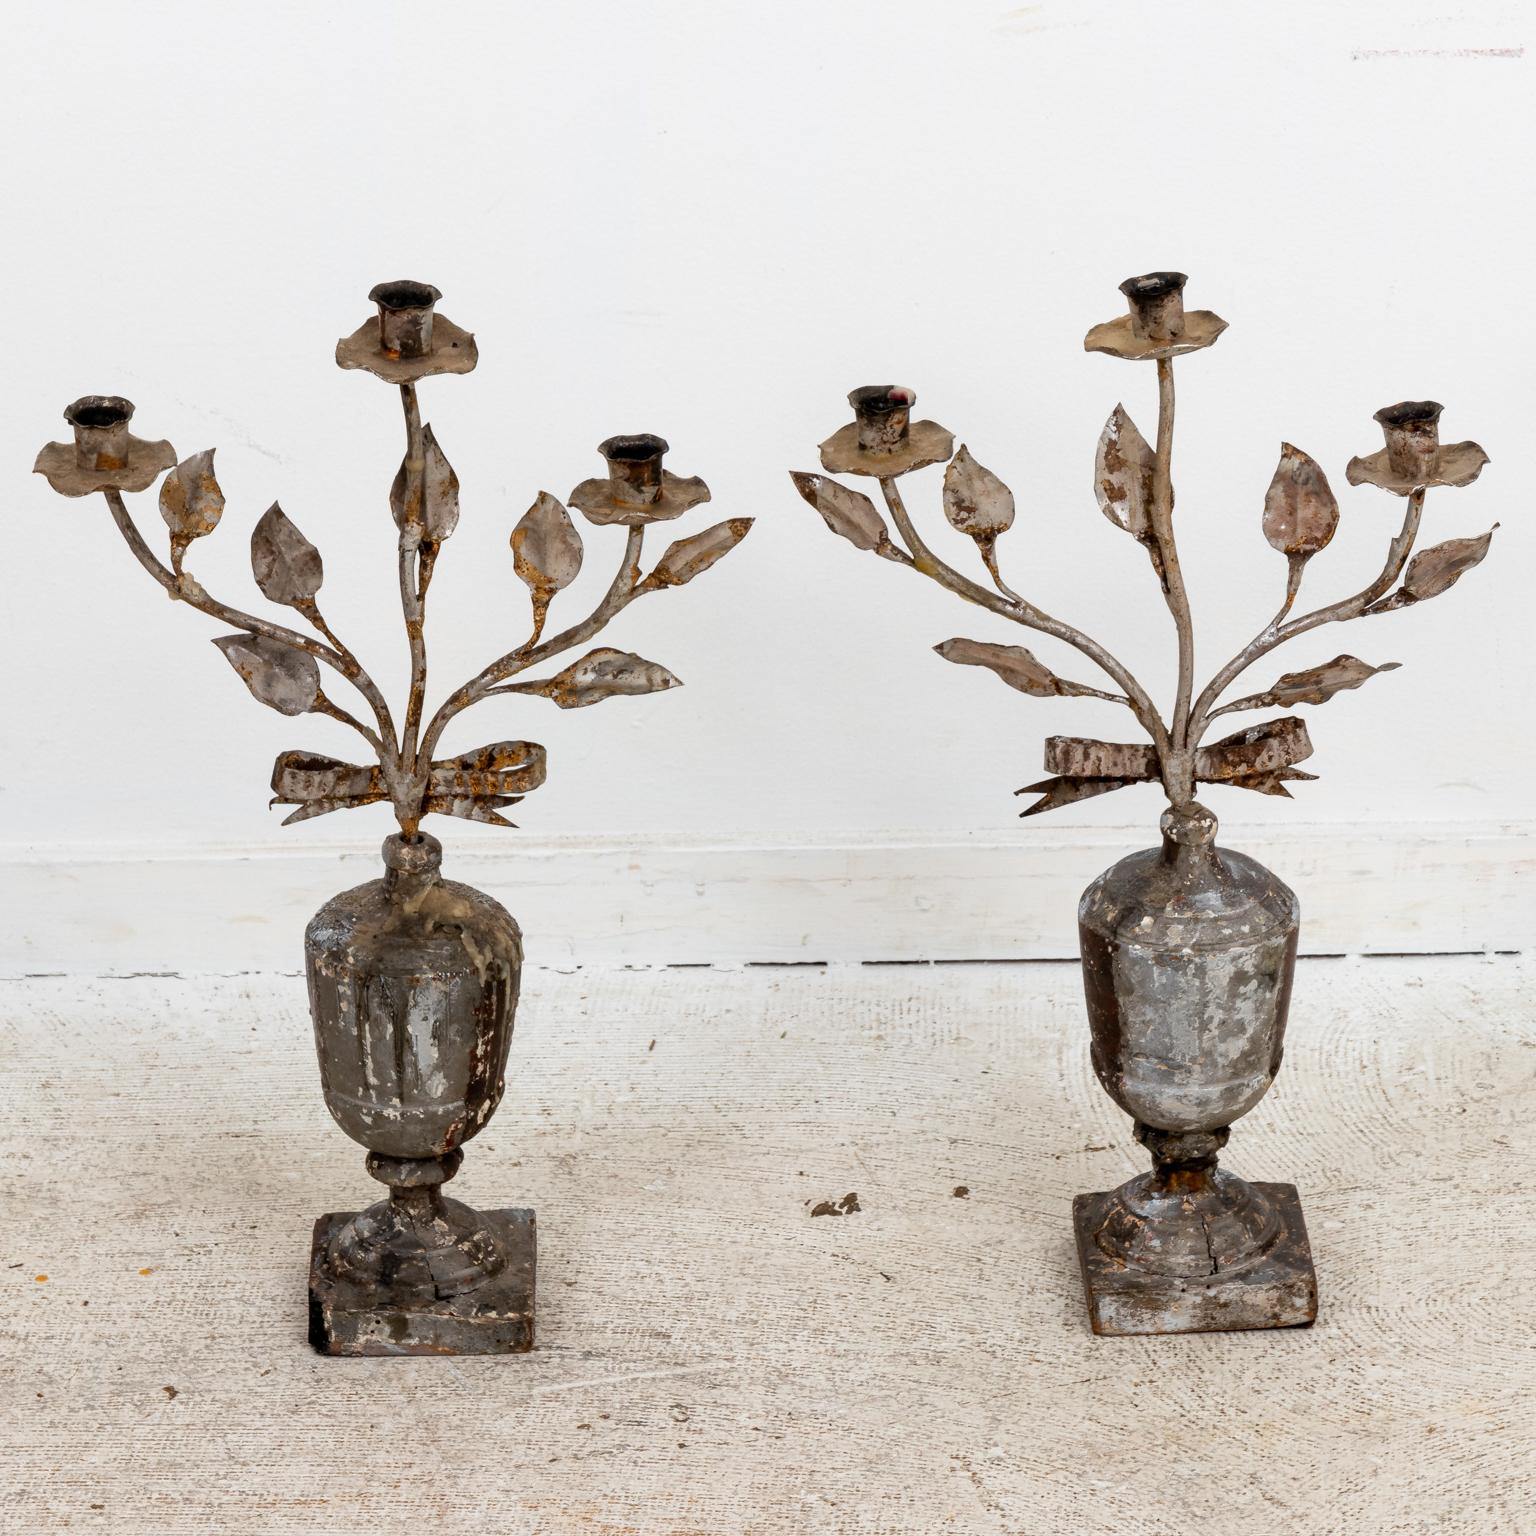 Circa 18th century pair of Continental silver giltwood candelabra, each feature three light candleholders with iron foliage on original urn form bases with ribbon bow. Possibly made in Italy. Please note of wear consistent with age. The candelabra